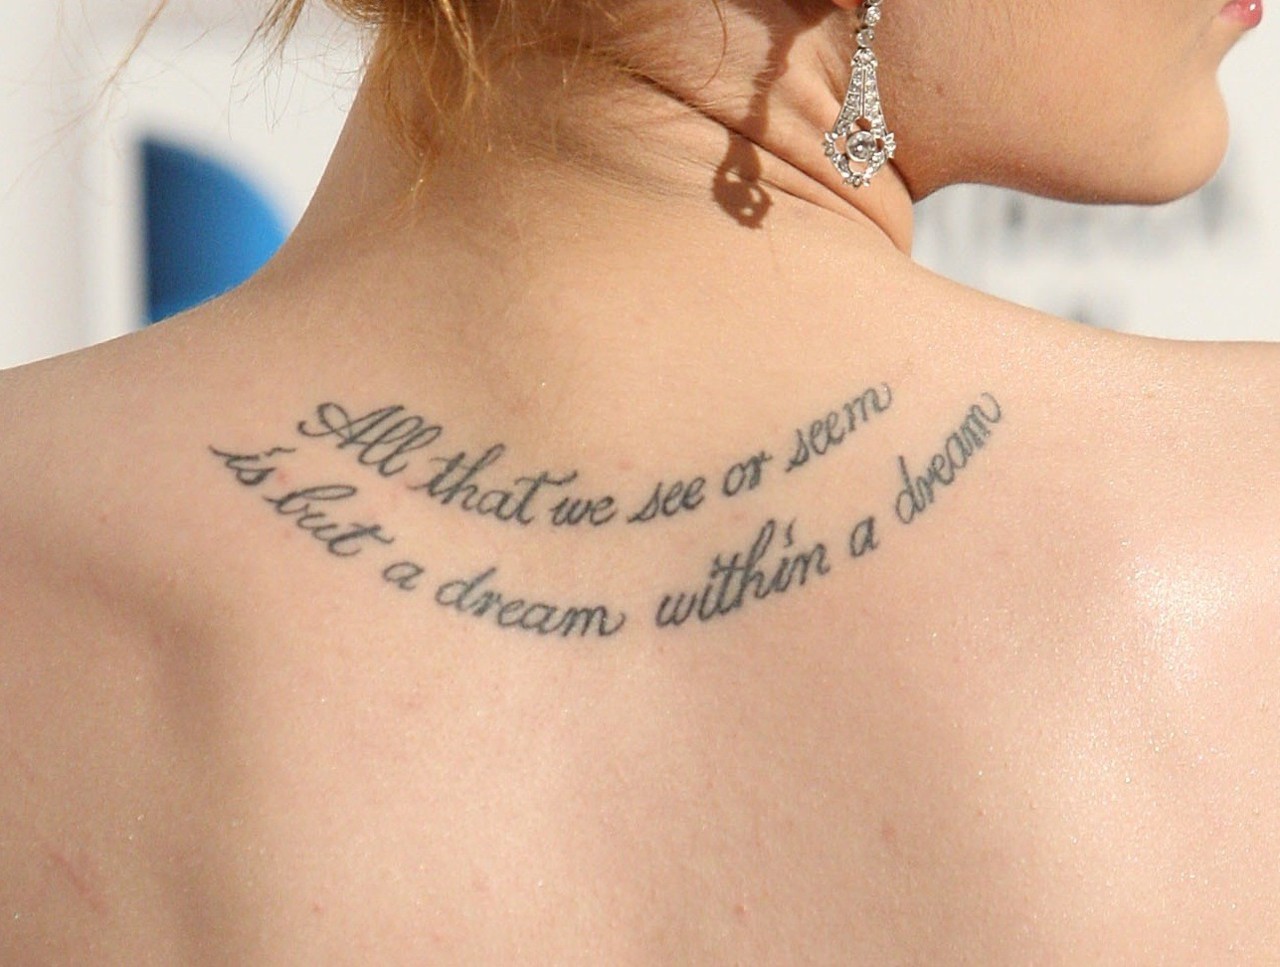 Quote Tattoos Designs, Ideas and Meaning | Tattoos For You